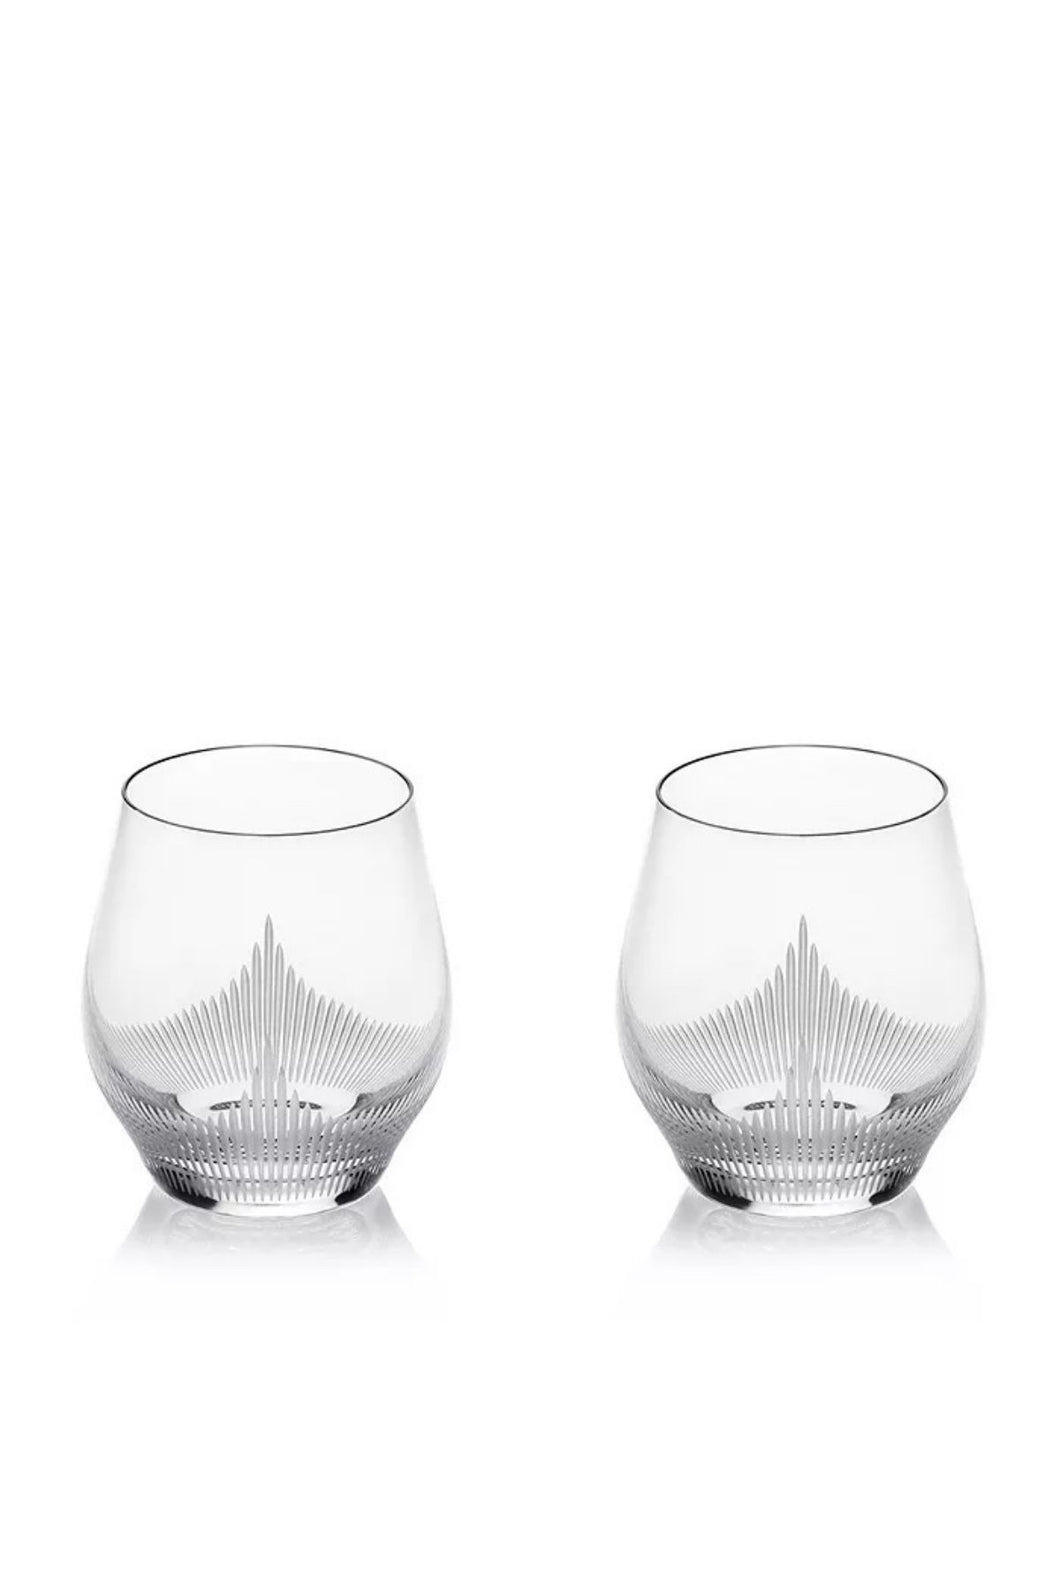 100 Points Small Tumbler, Set of 2